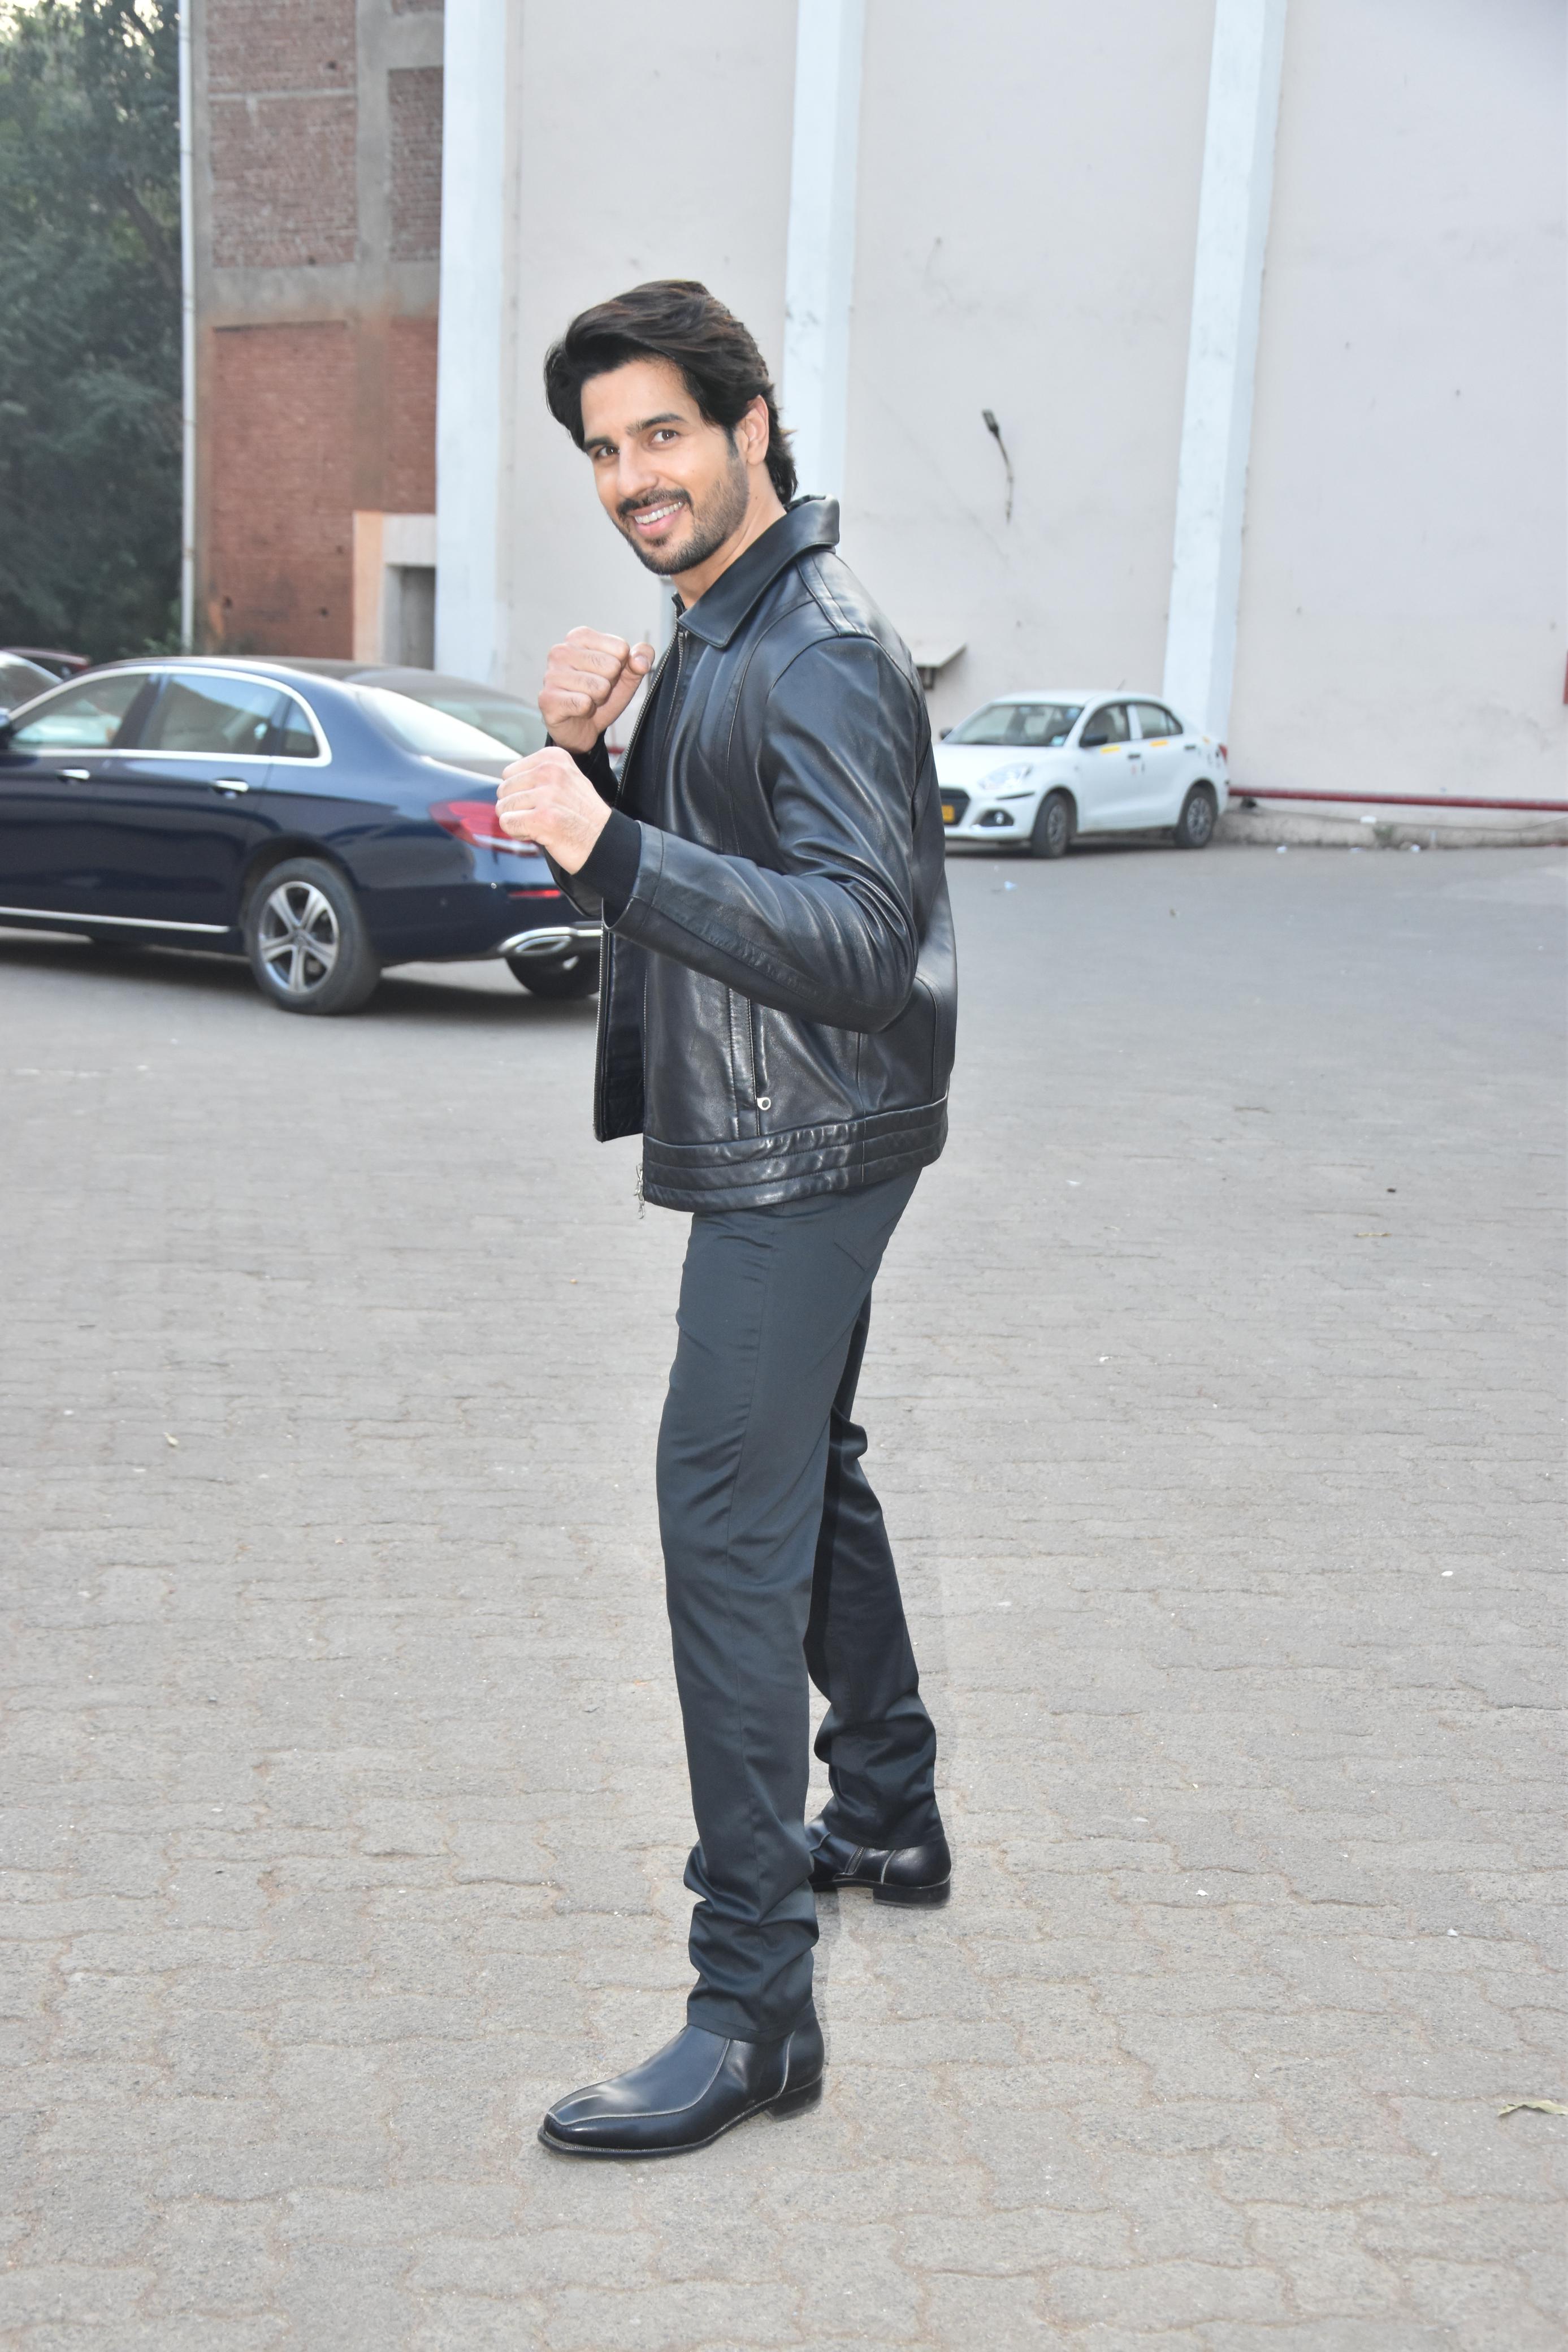 Sidharth Malhotra was clicked at the Mehboob studios today